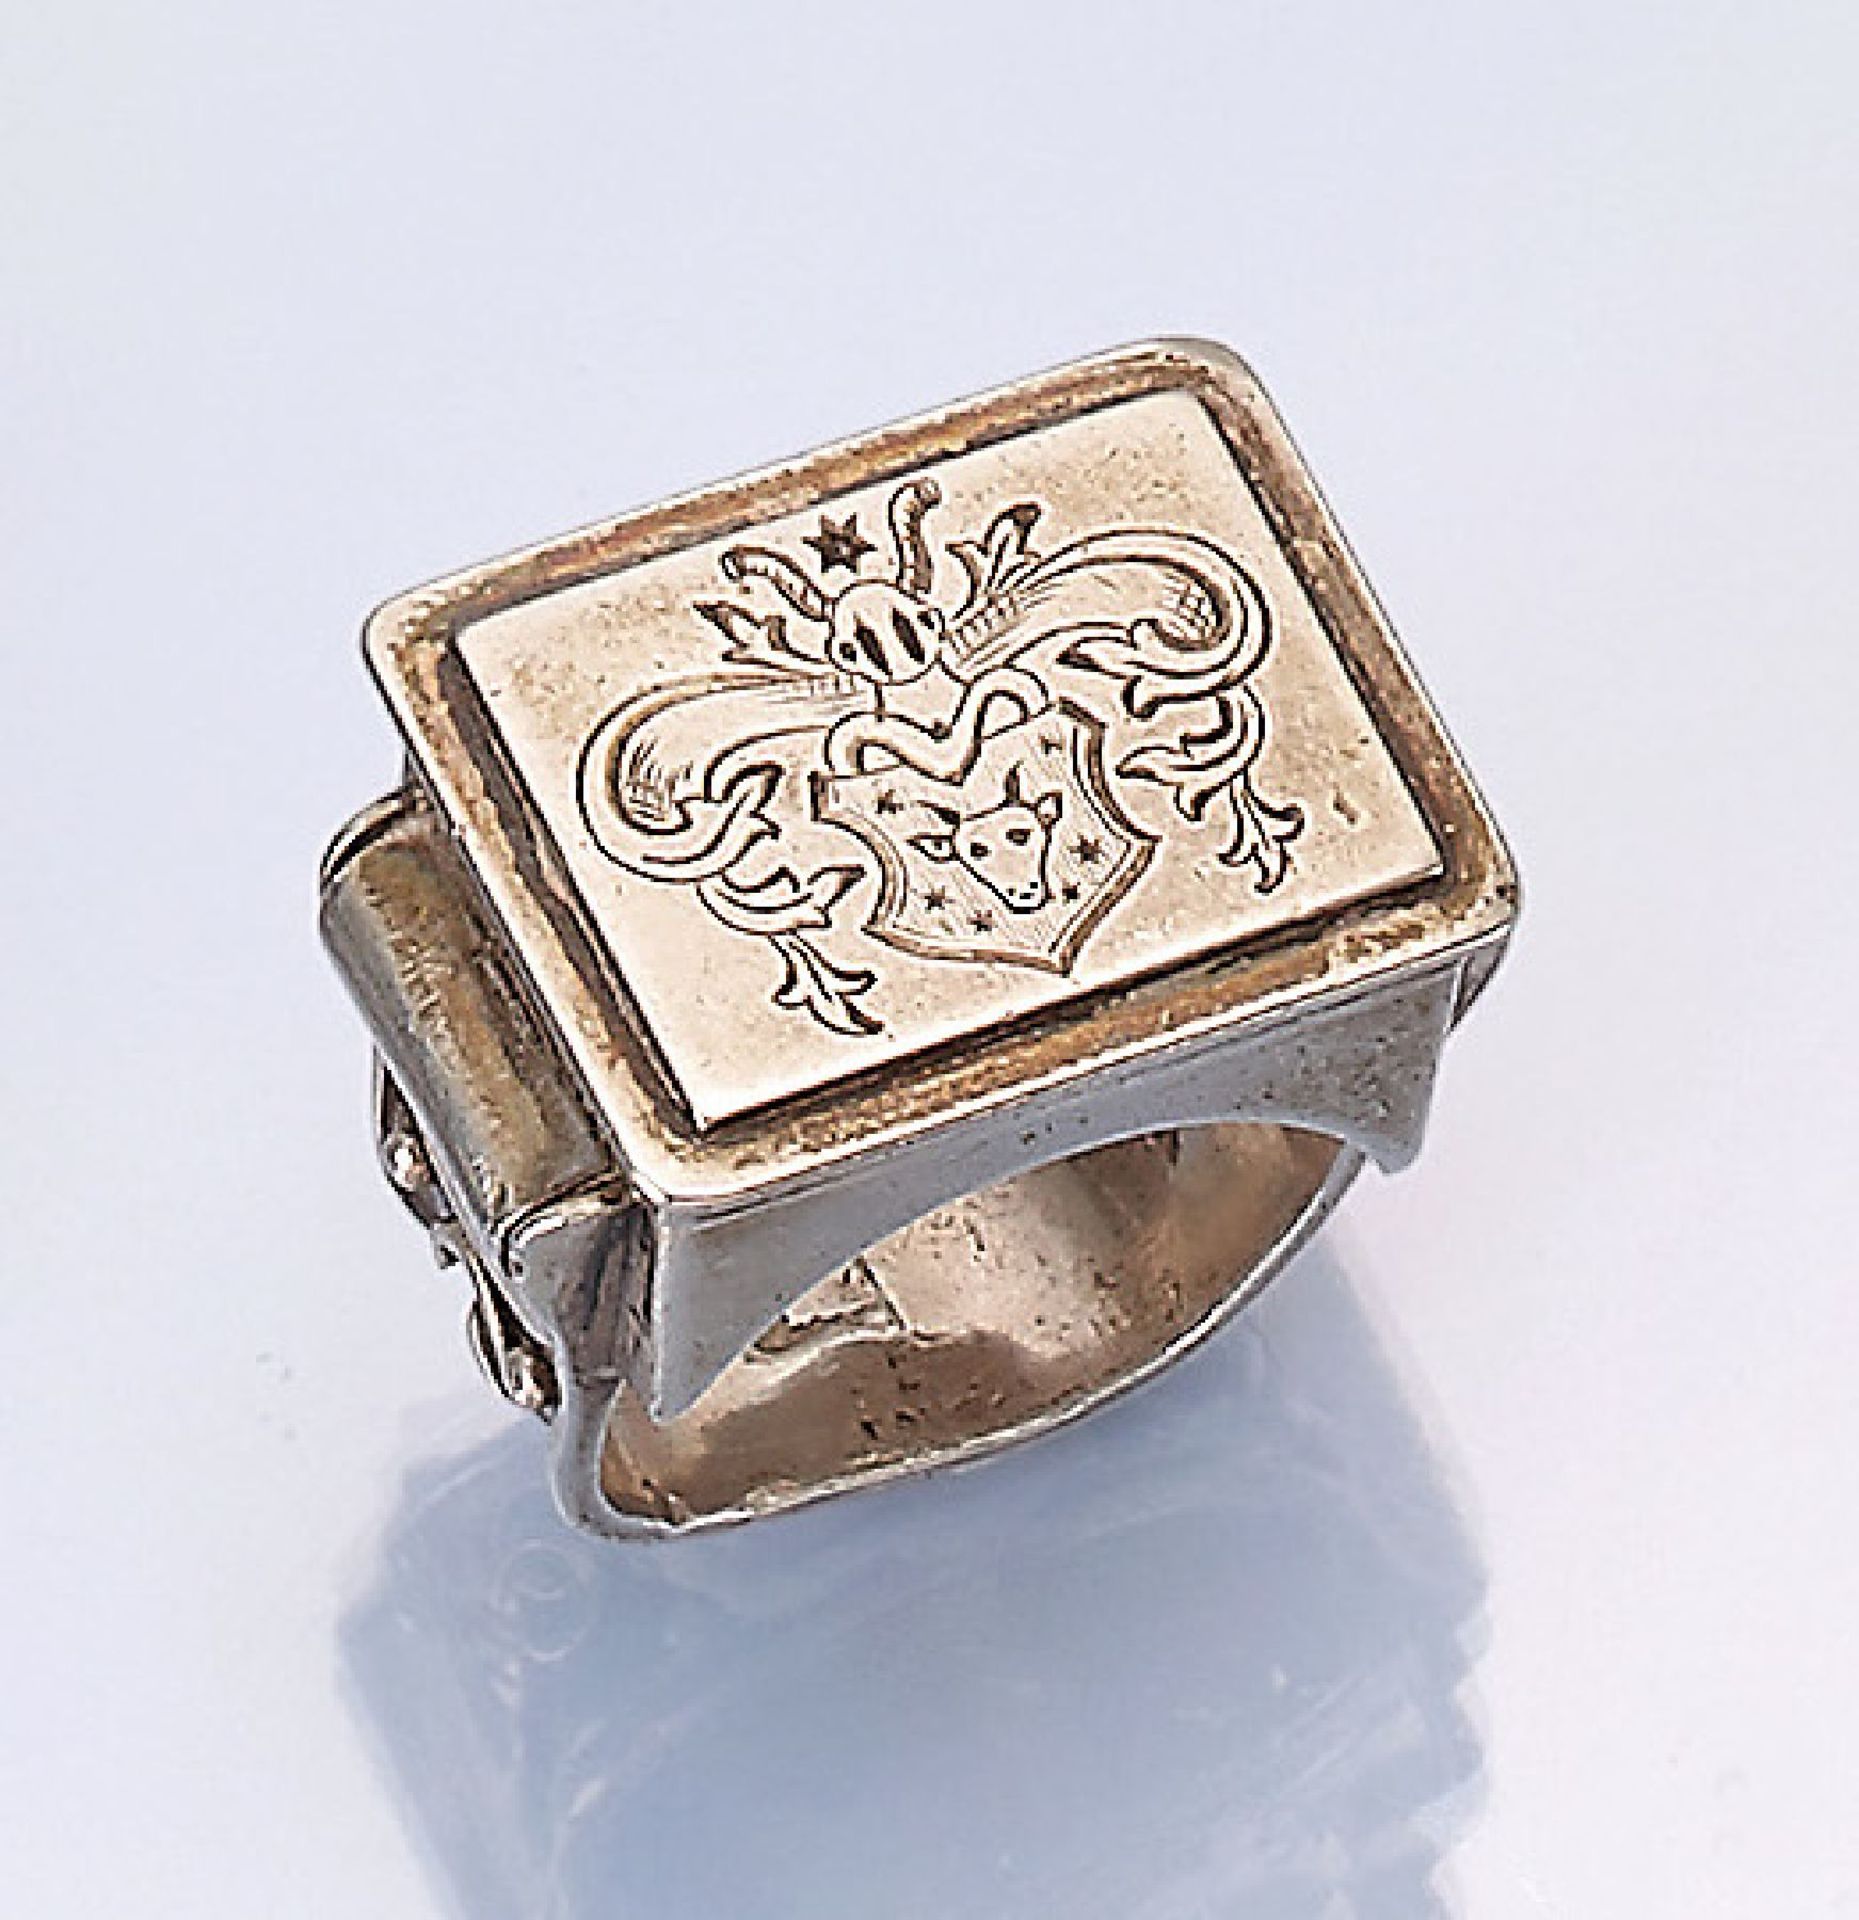 Poisonring, approx. 1900/10s , silver, splint with silver wreath and granulates, cover with